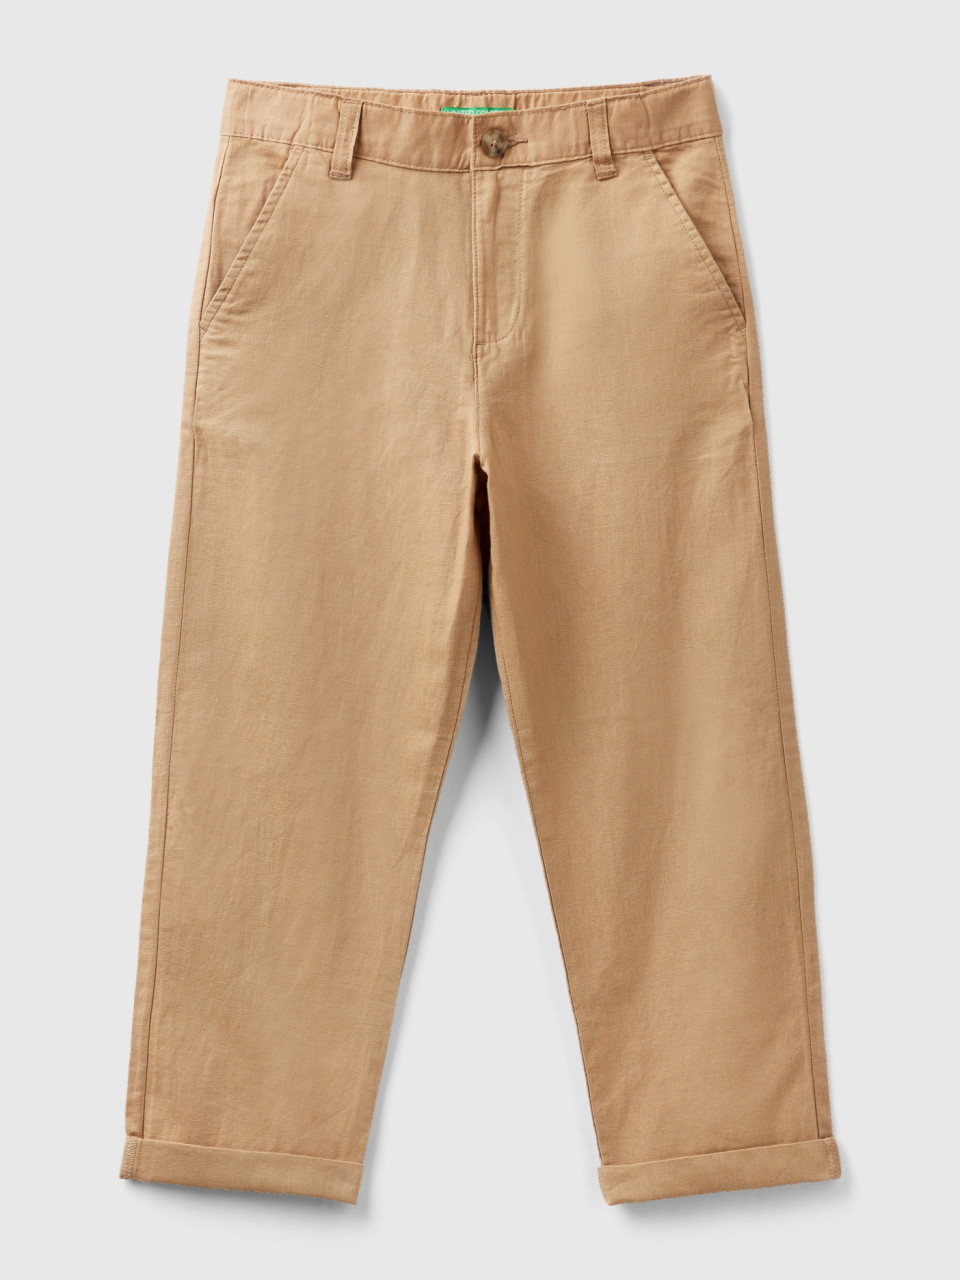 Benetton, Hose Aus Leinenmischung In Relaxed Fit, Camel, male